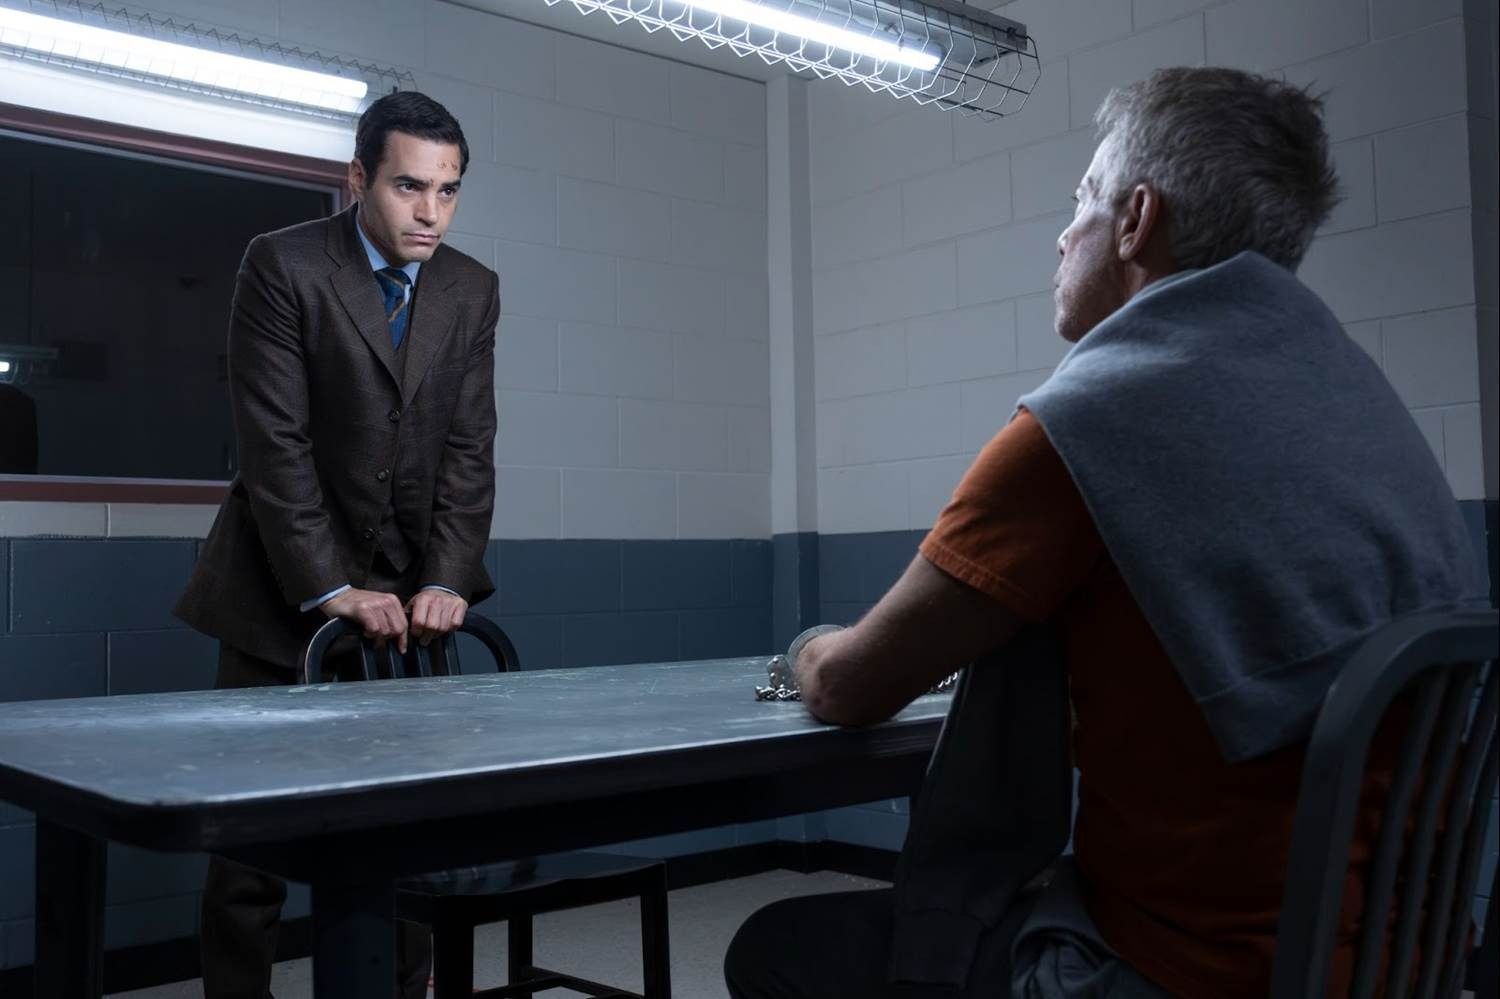 Greg Germann as James Ulster with Ramon Rodriguez as Will Trent looking at each other in an interrogation room 2